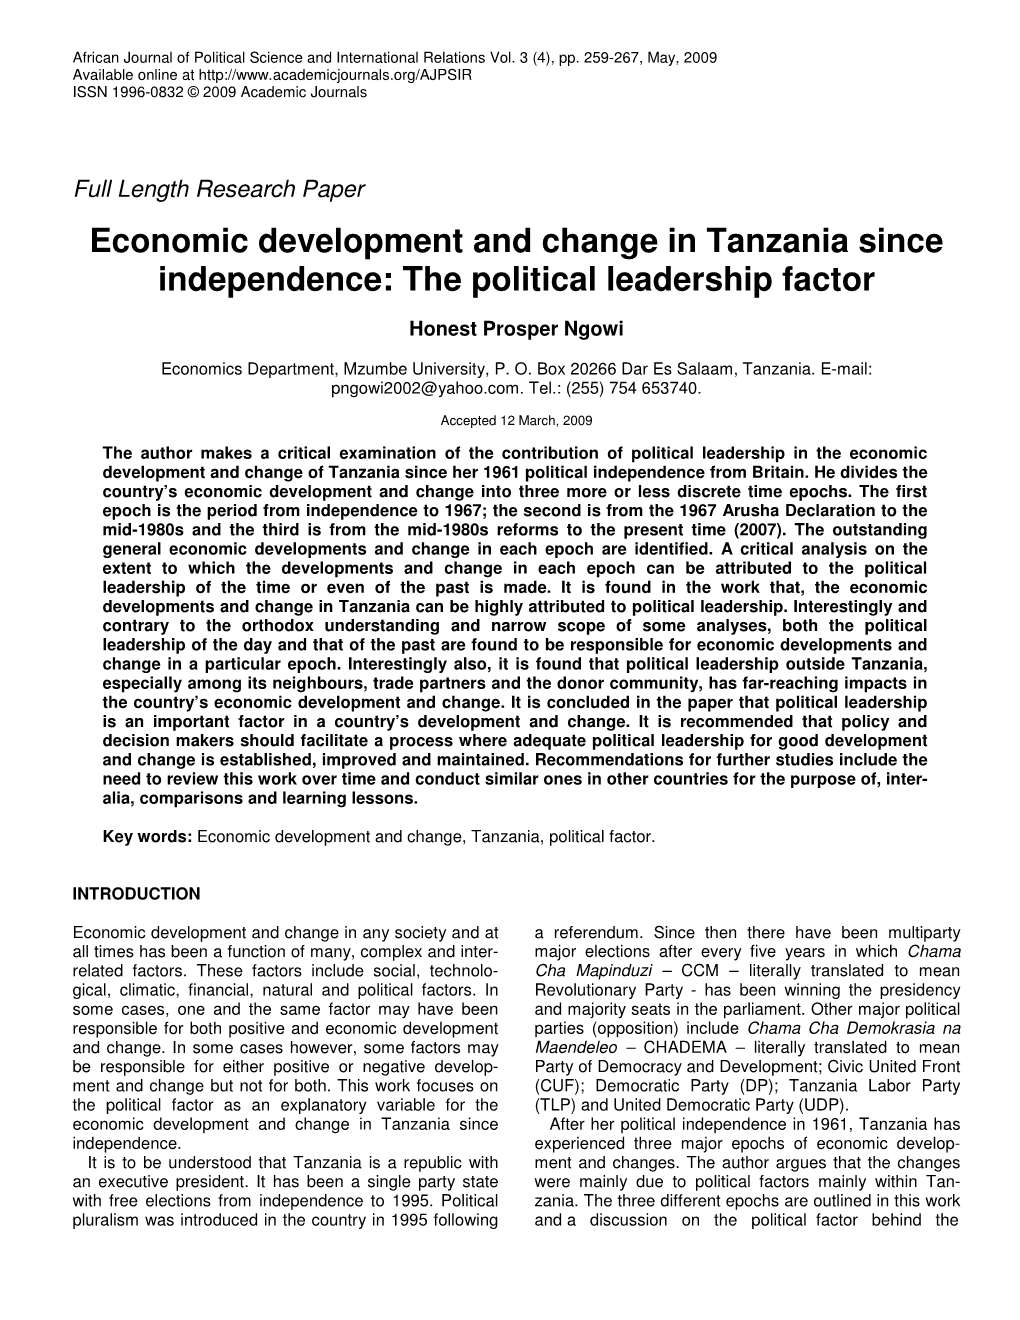 Economic Development and Change in Tanzania Since Independence: the Political Leadership Factor